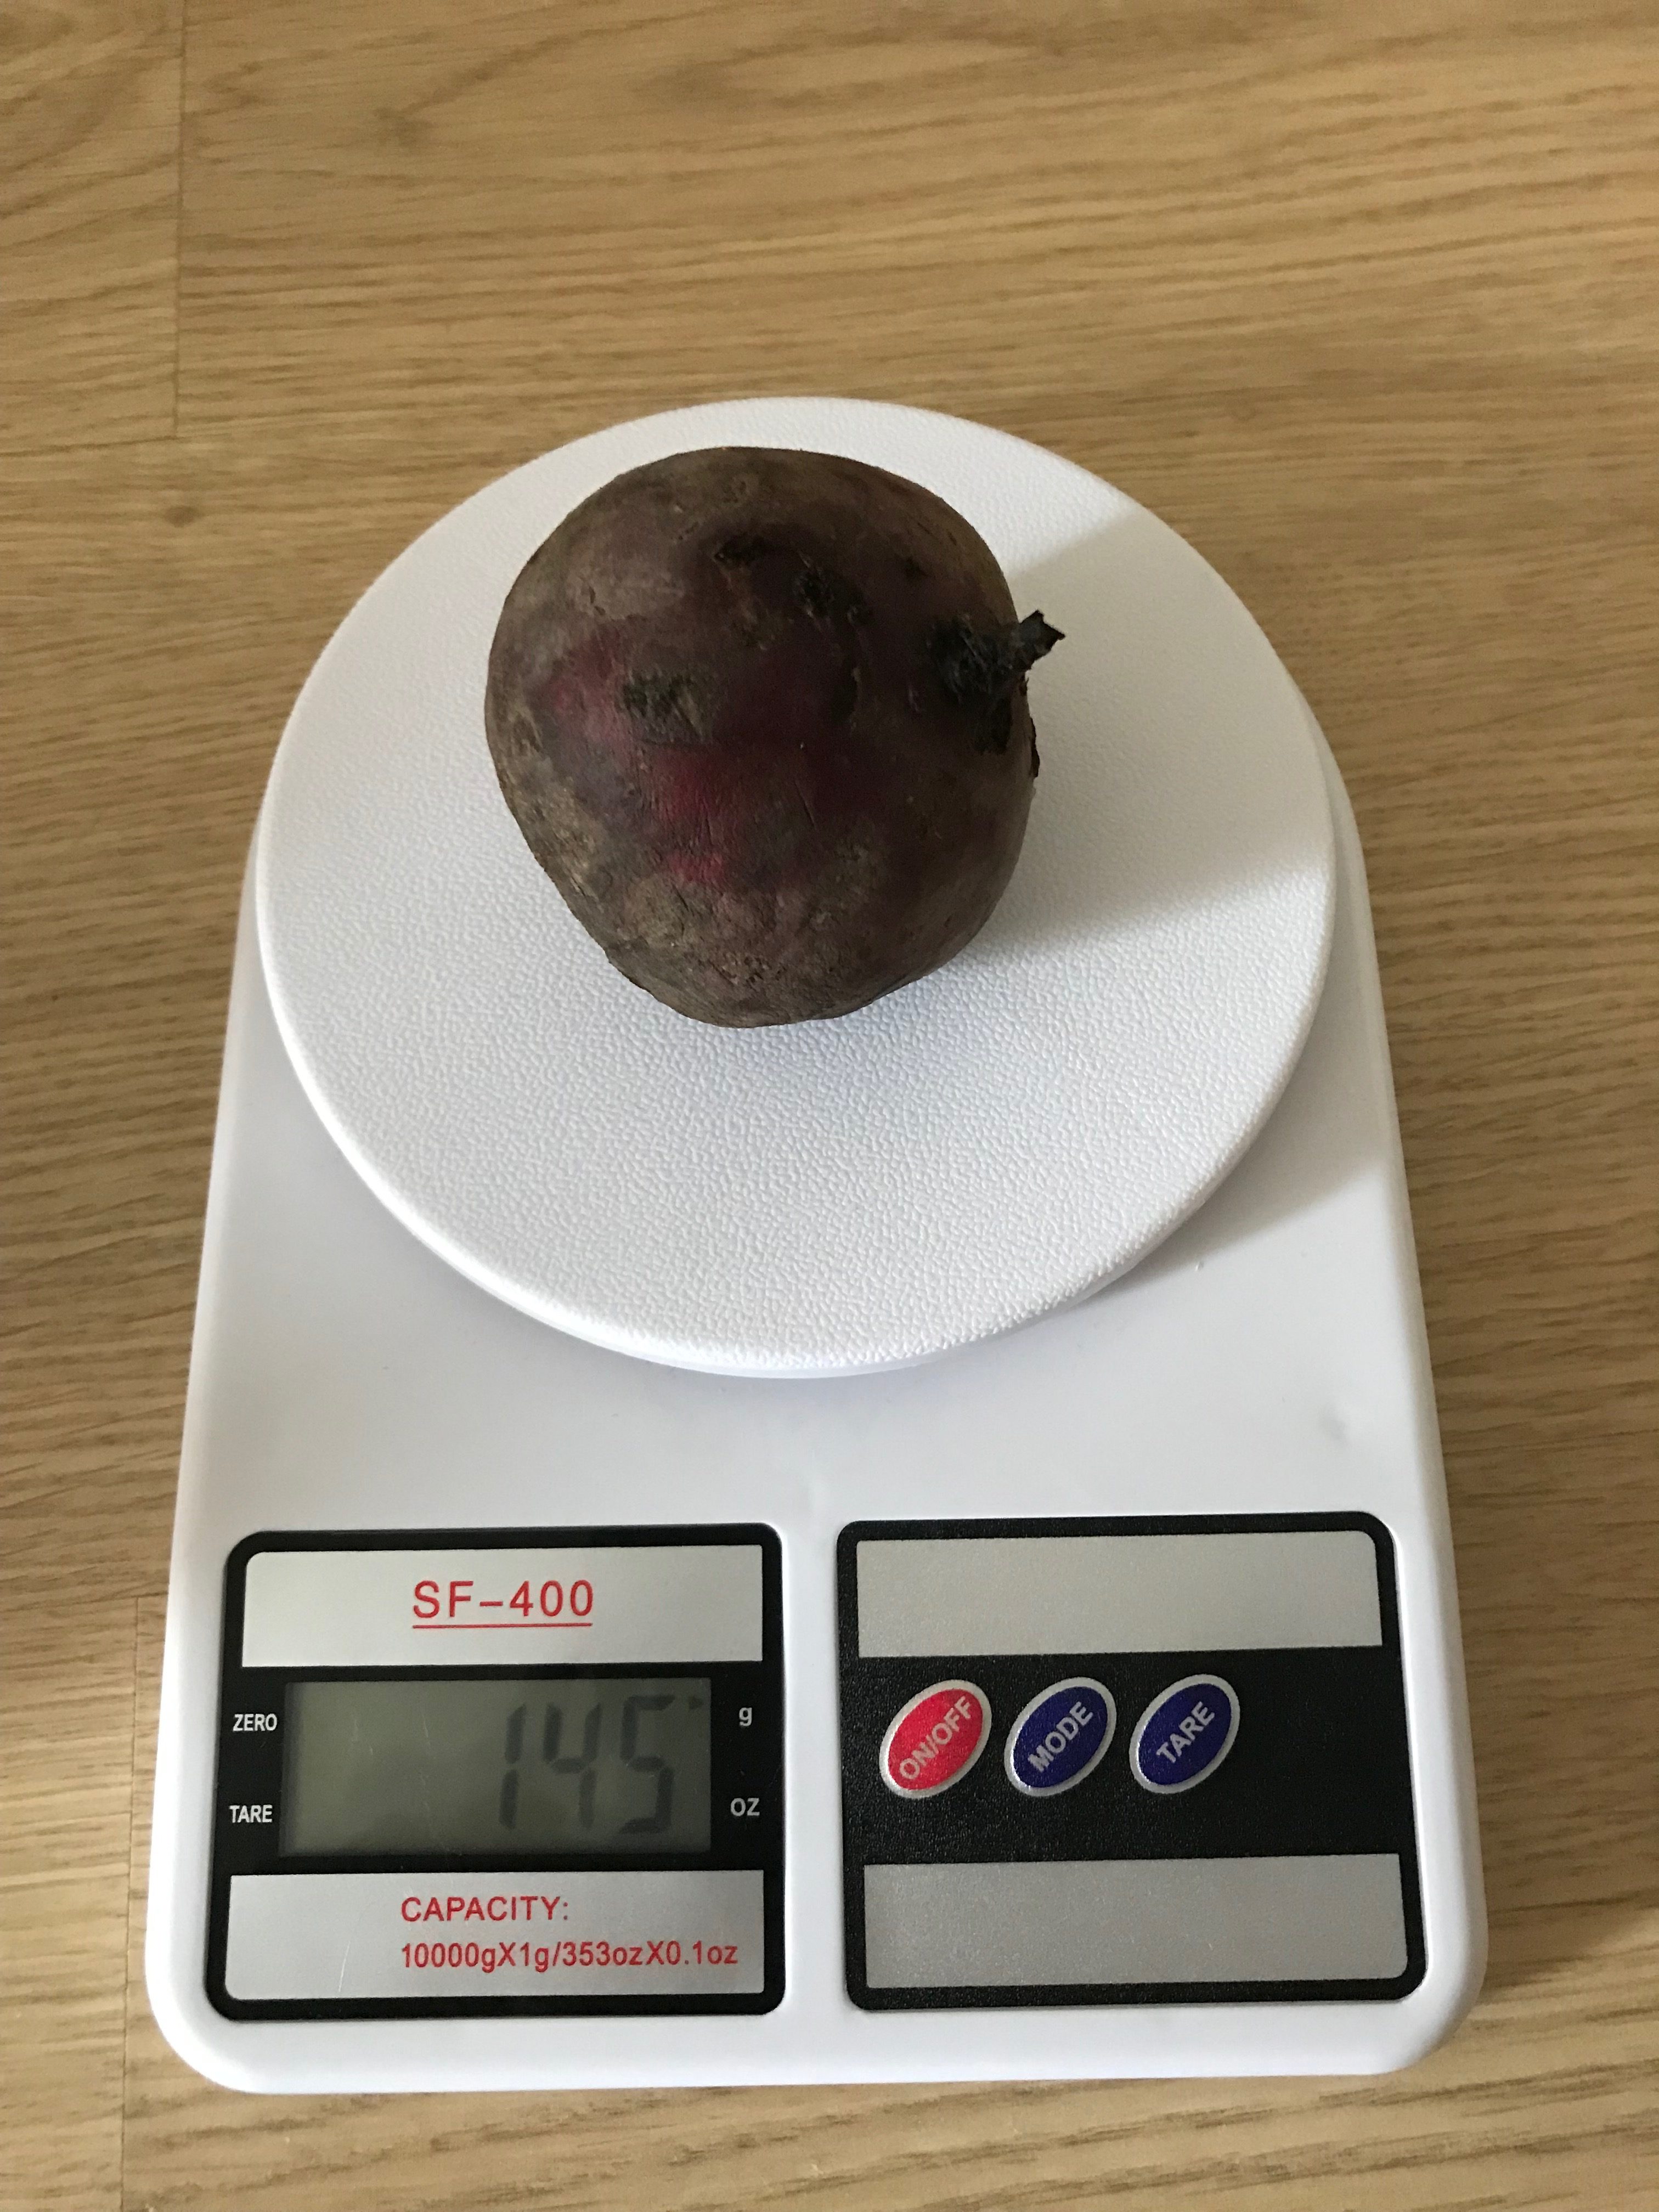 weight of beetroot